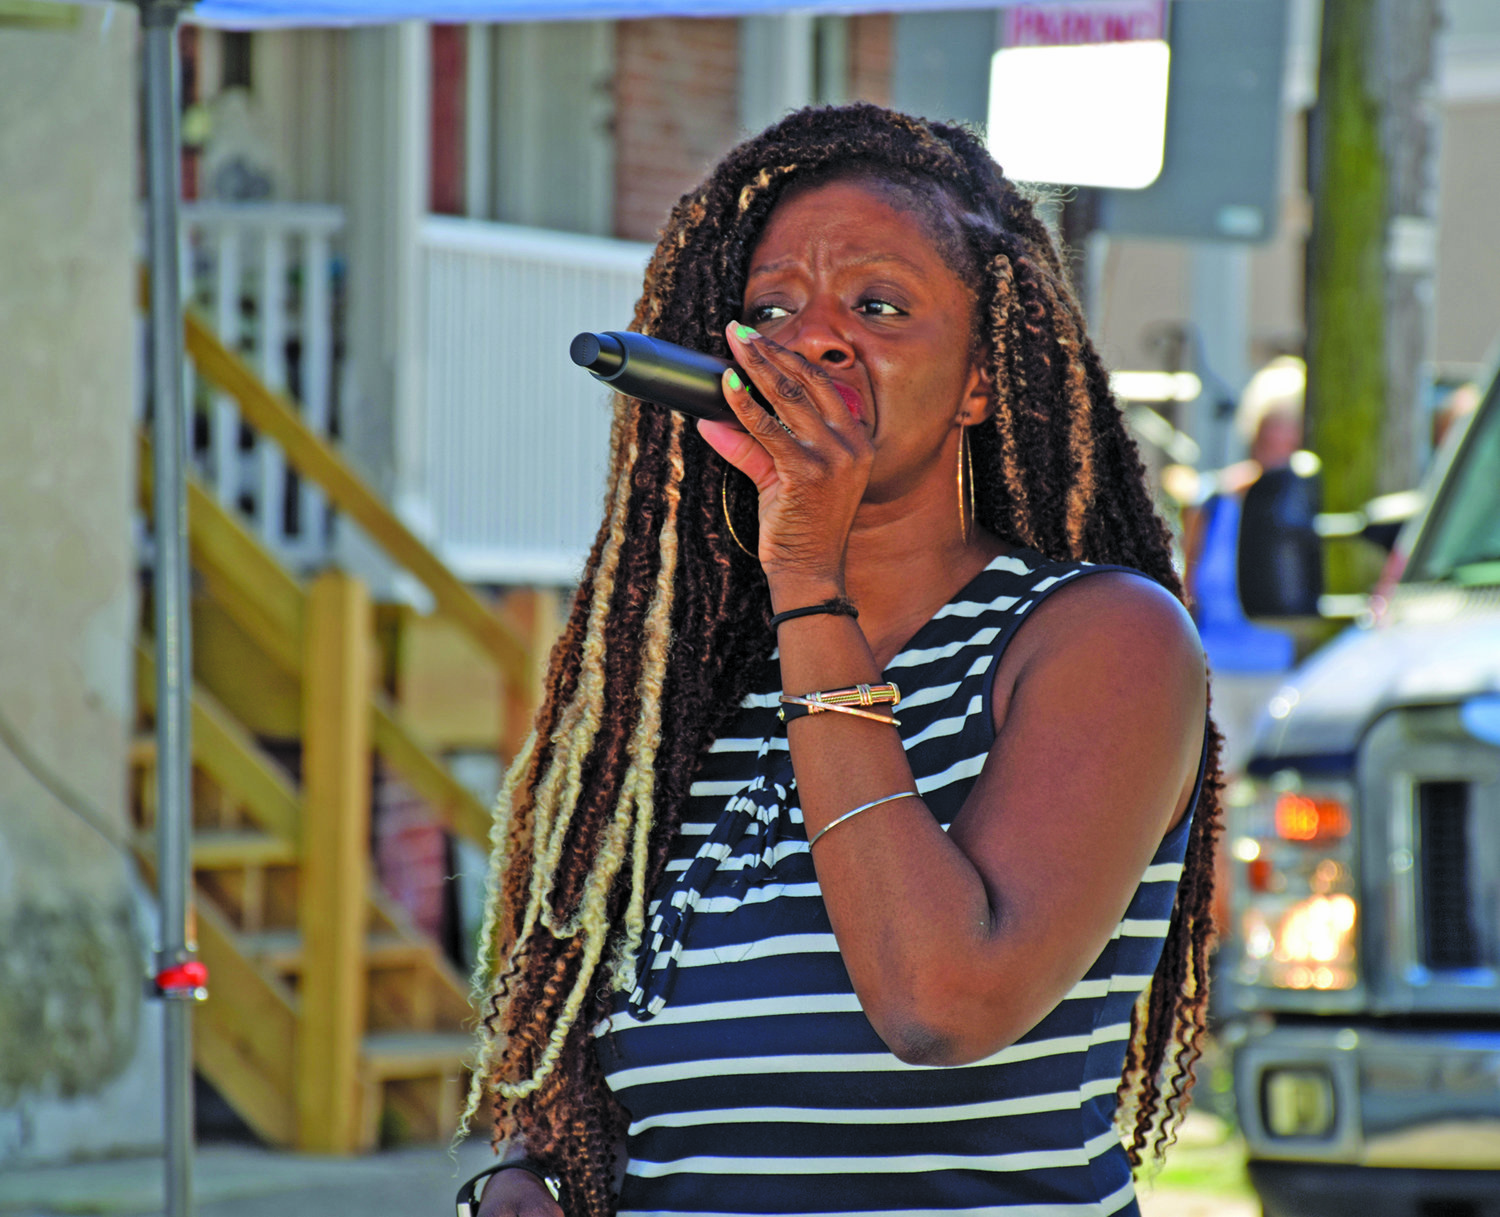 Elle Gyandoh of Mt Airy performs for the crowd.